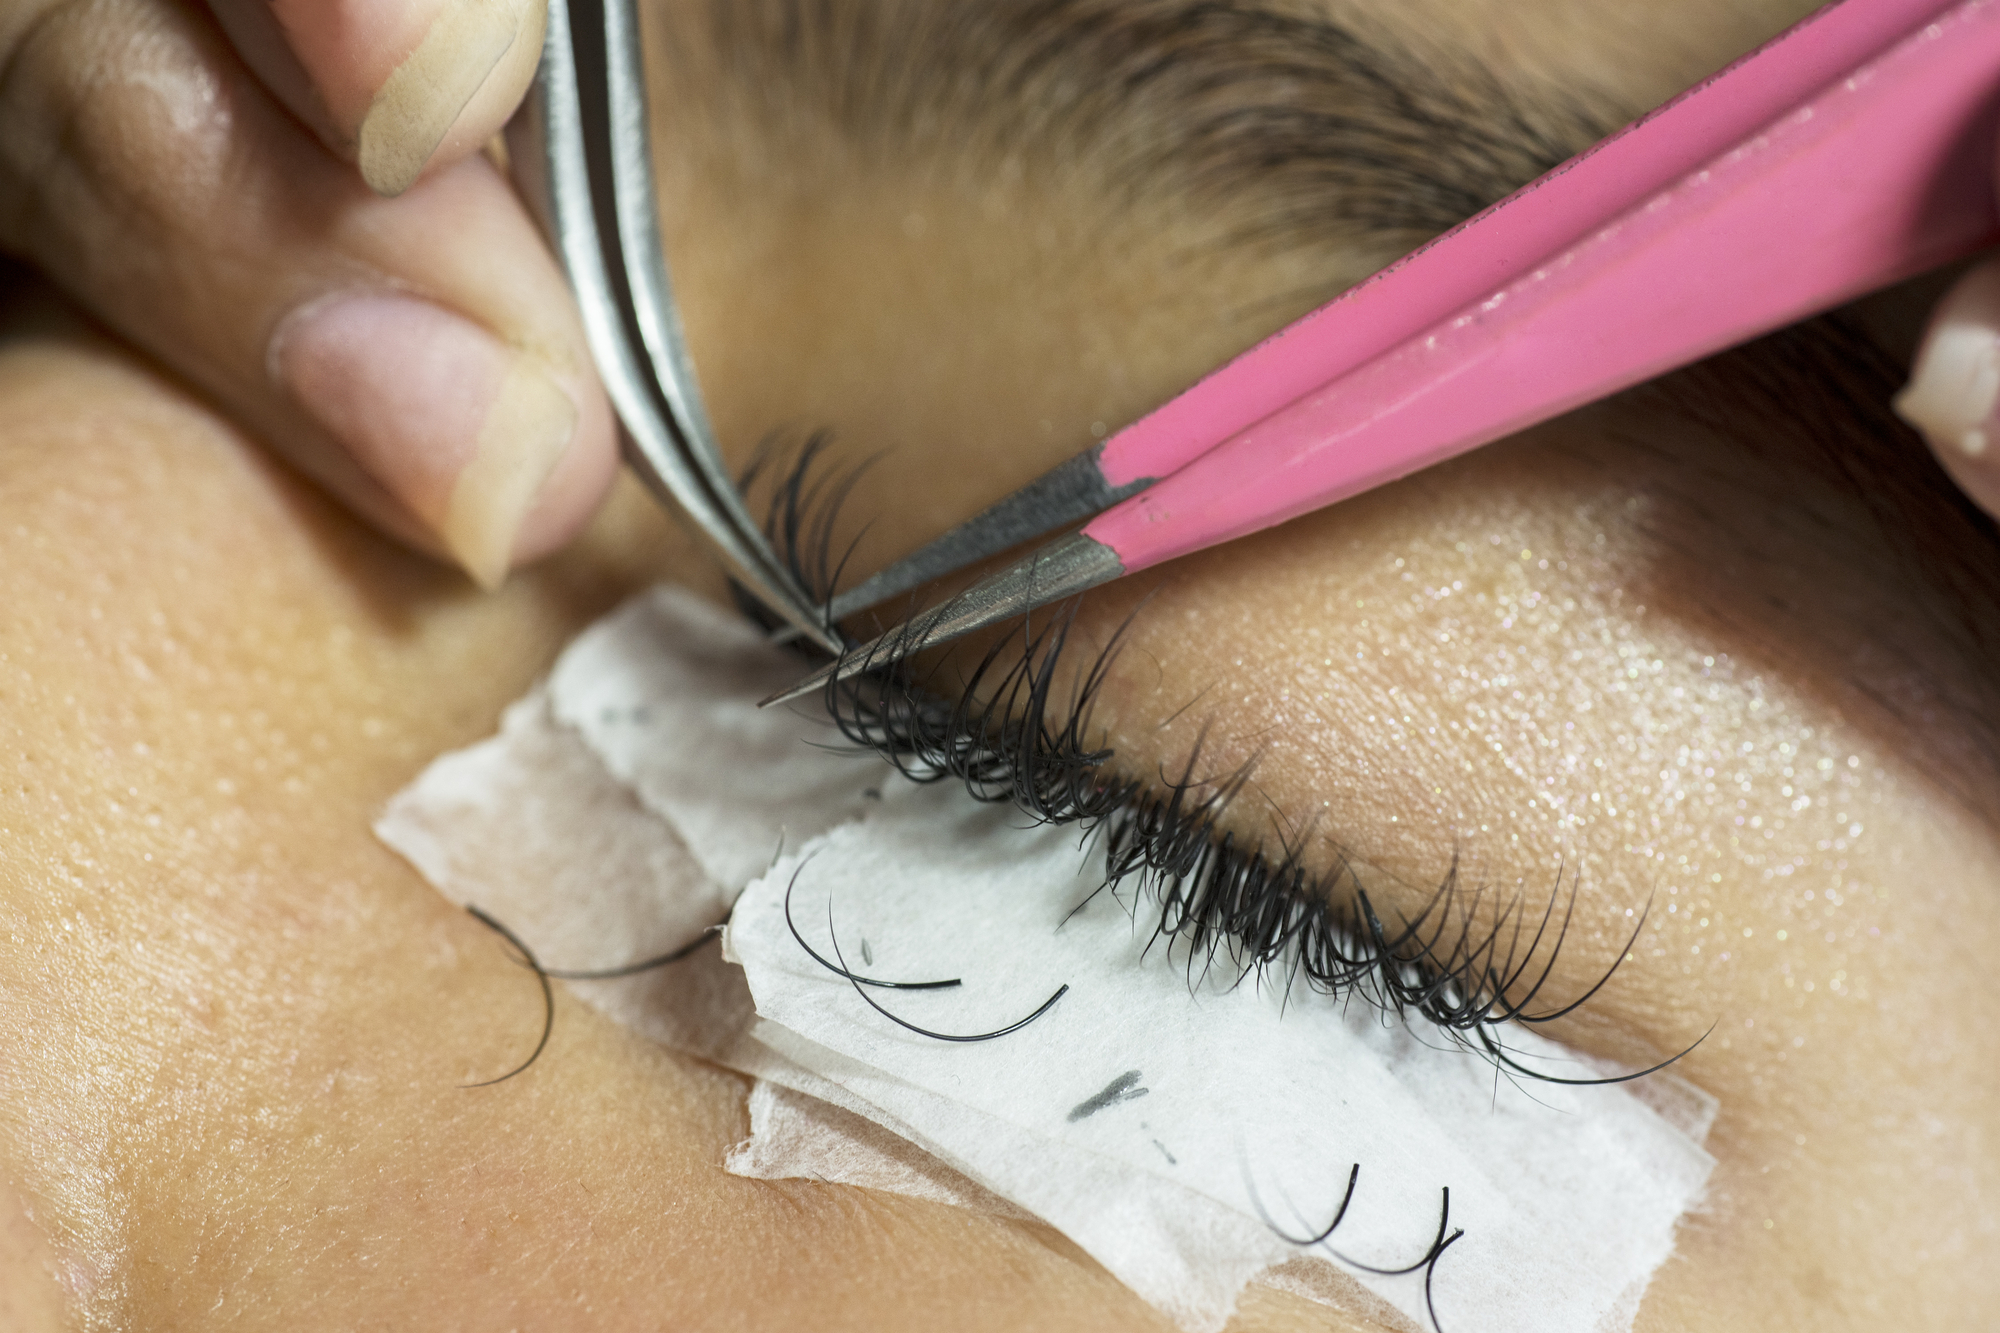 How to remove eyelash extensions safely